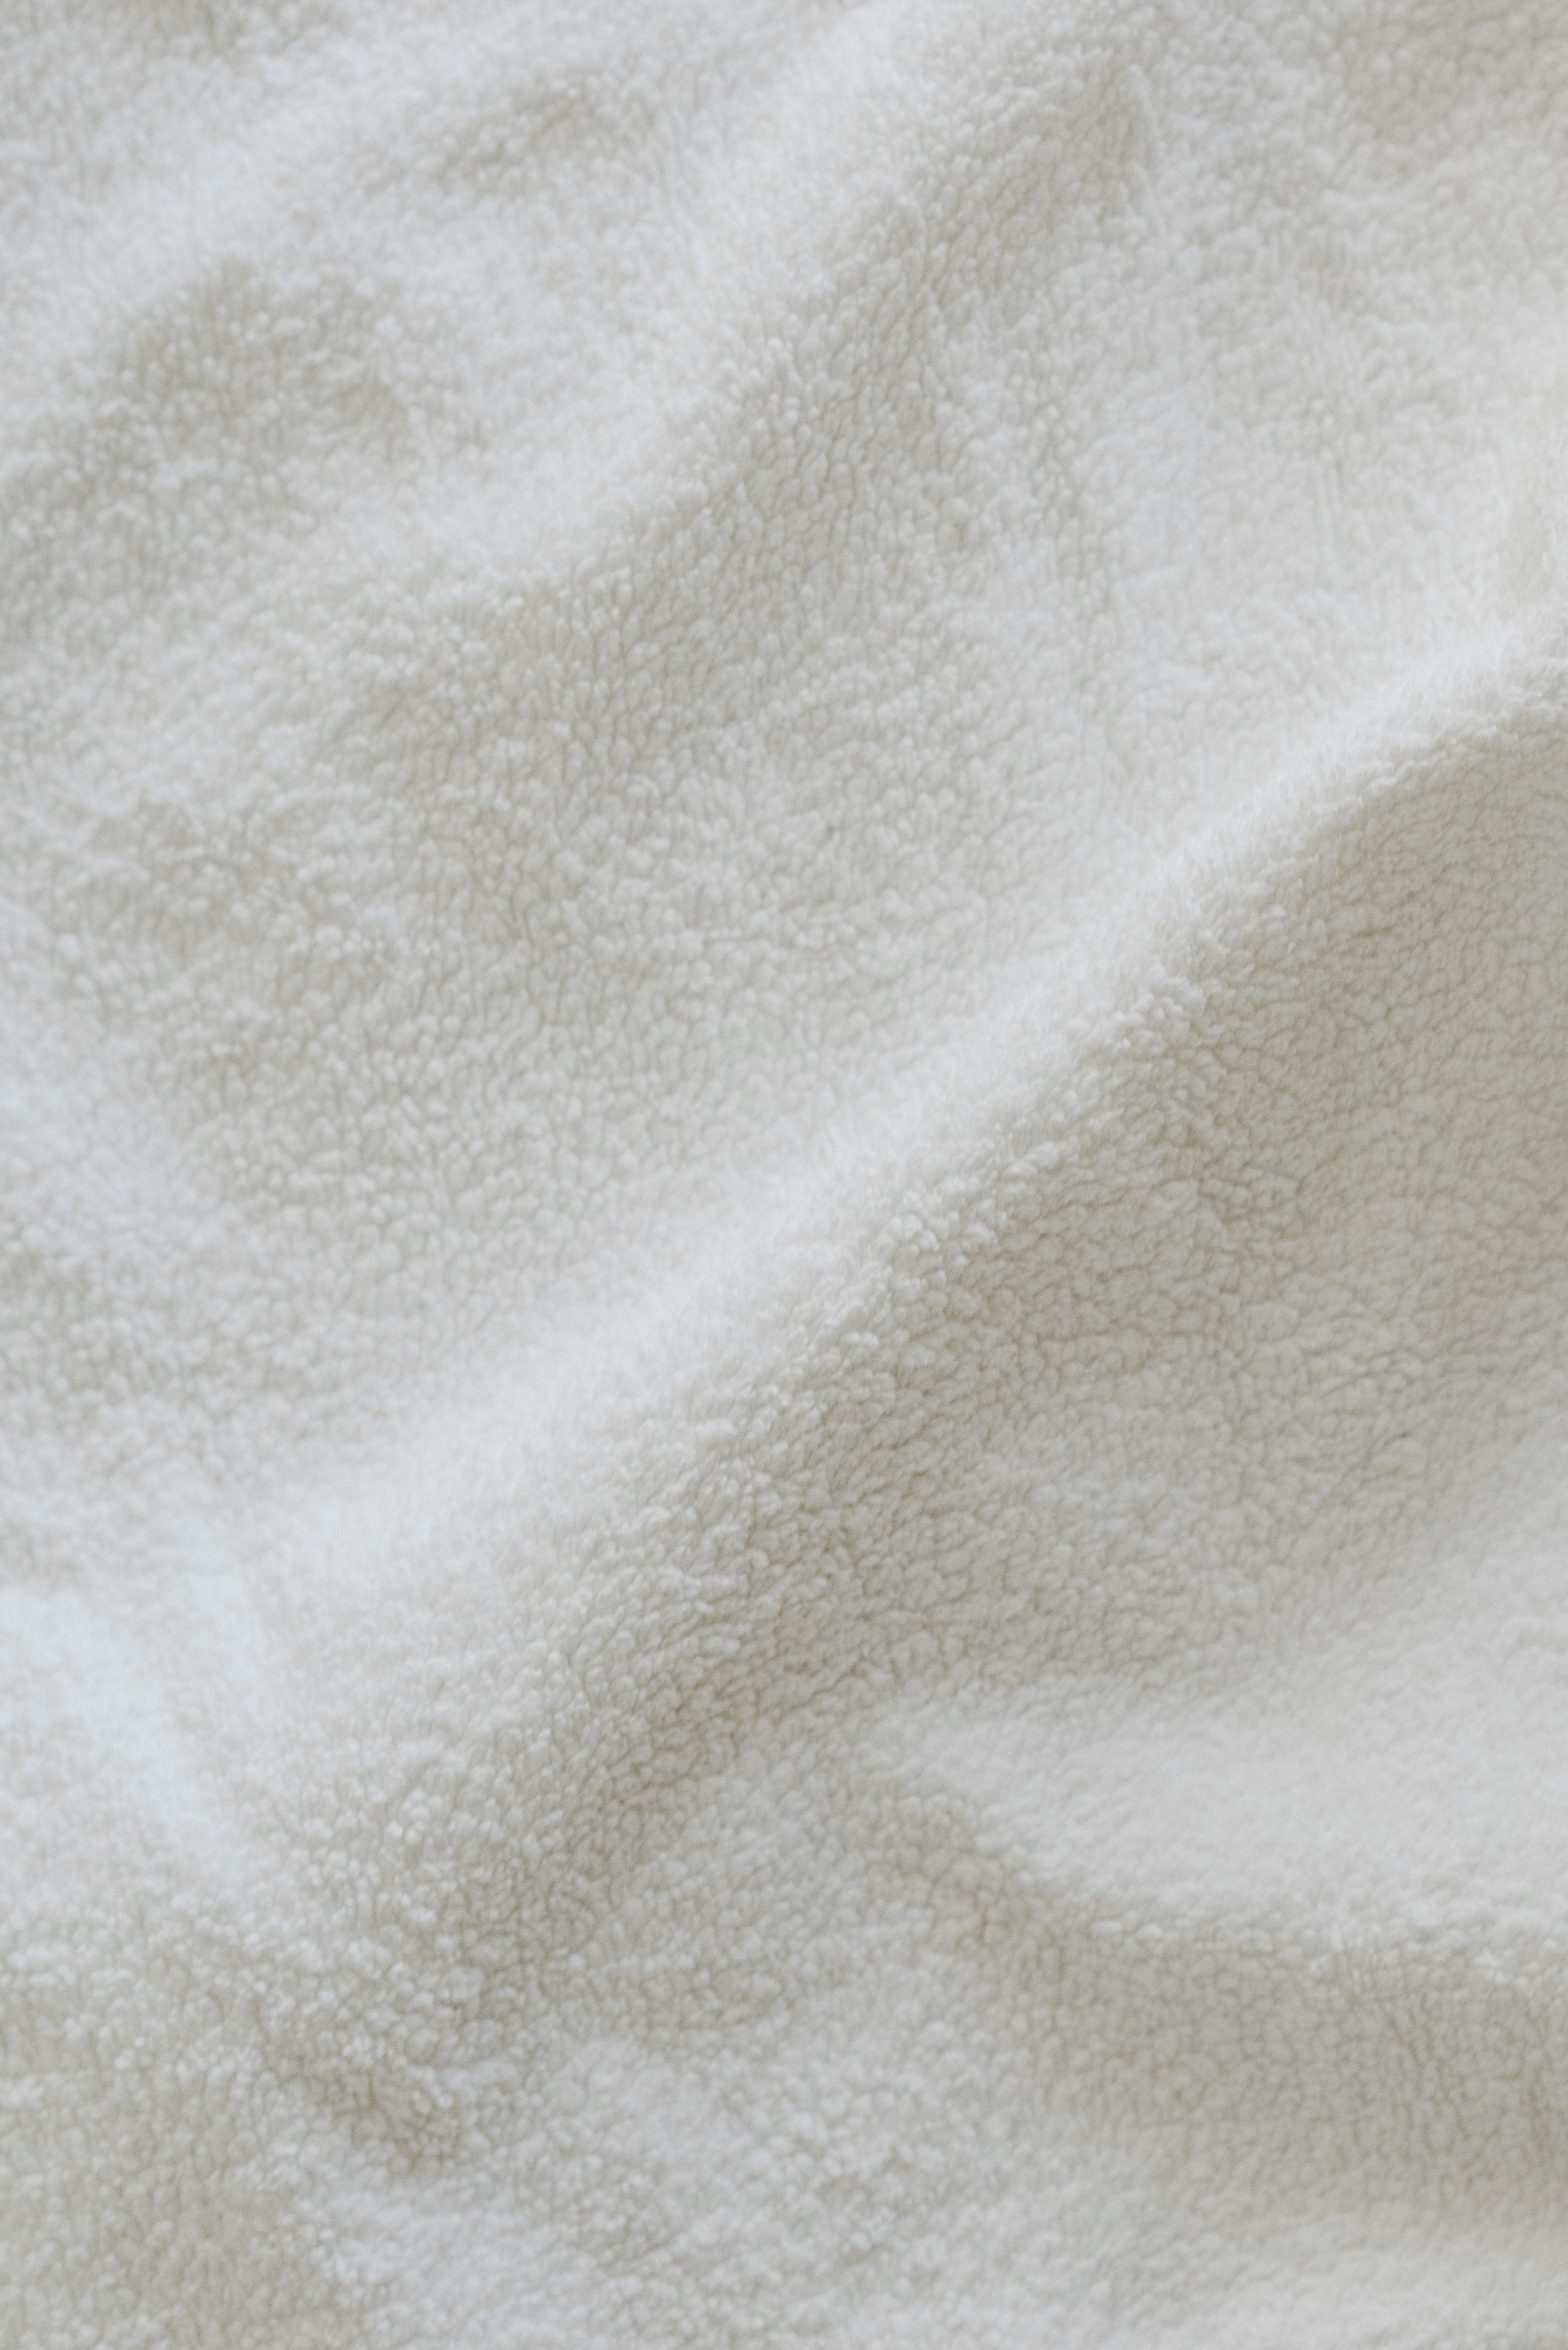 The Benefits Of Using Organic Cotton For Your Projects